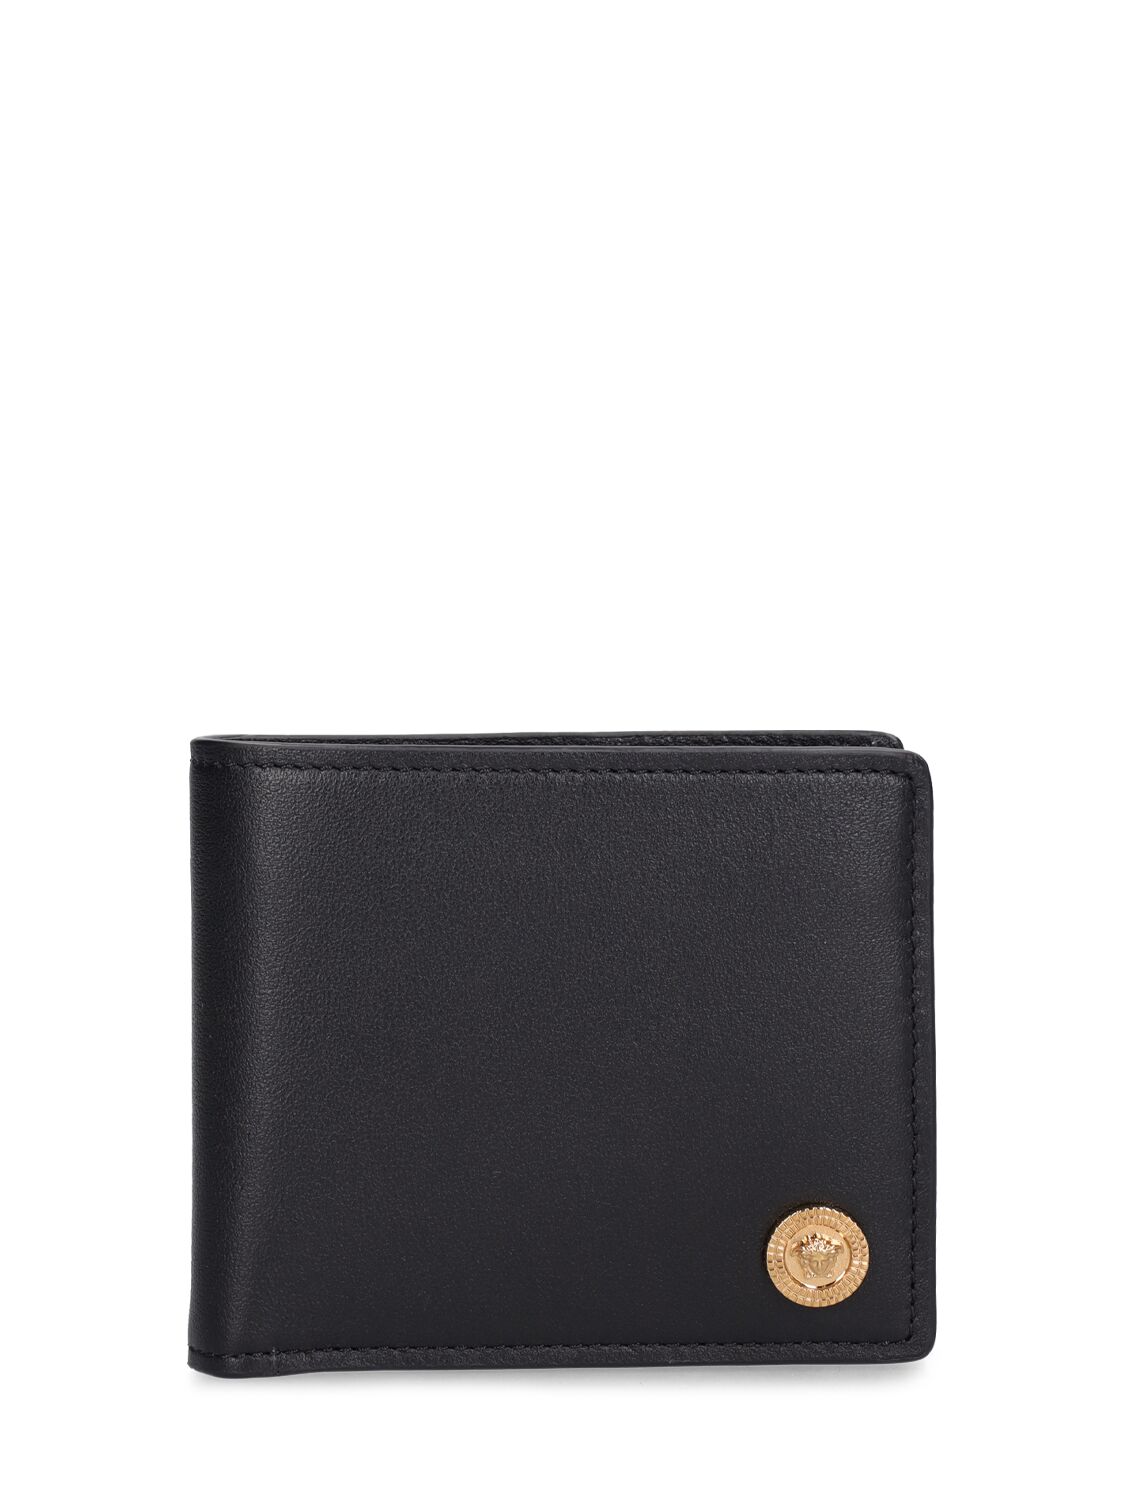 Versace Leather Wallet W/coin Pocket In Black,gold